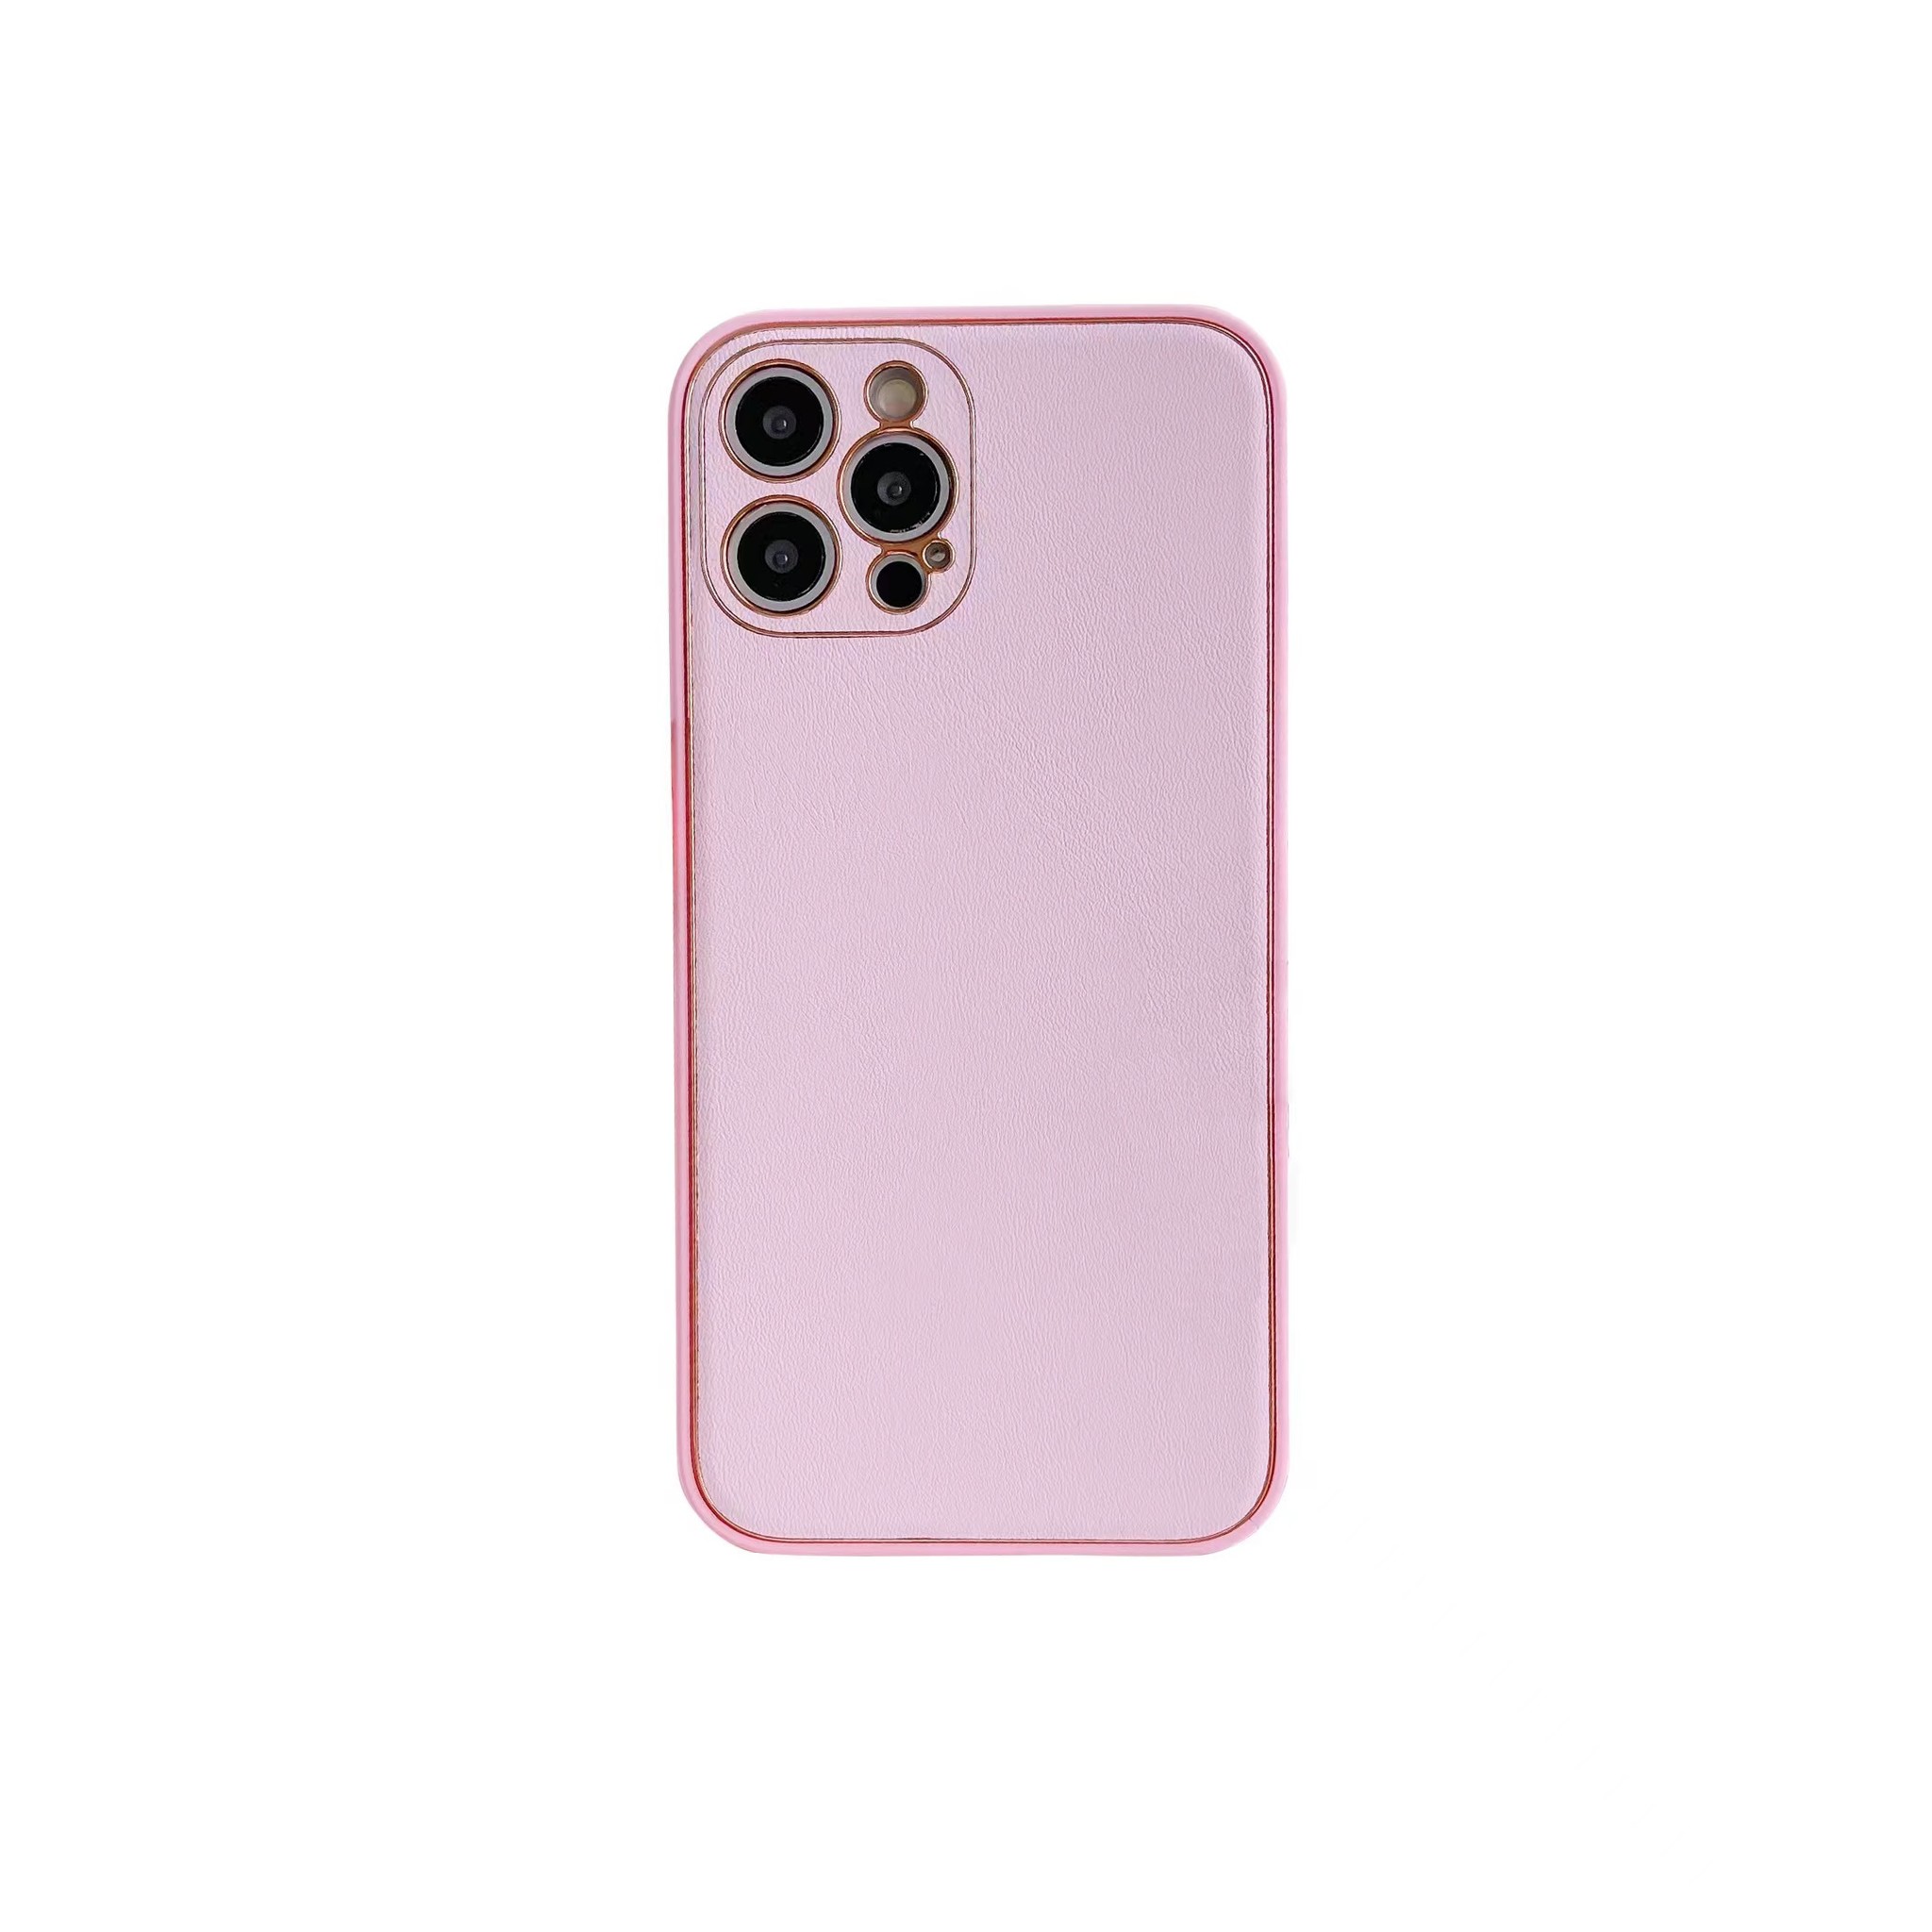 iPhone 13 Pro Max Back Cover Hoesje - leer - Luxe - Backcover - Apple iPhone 13 Pro Max - Roze/Goud